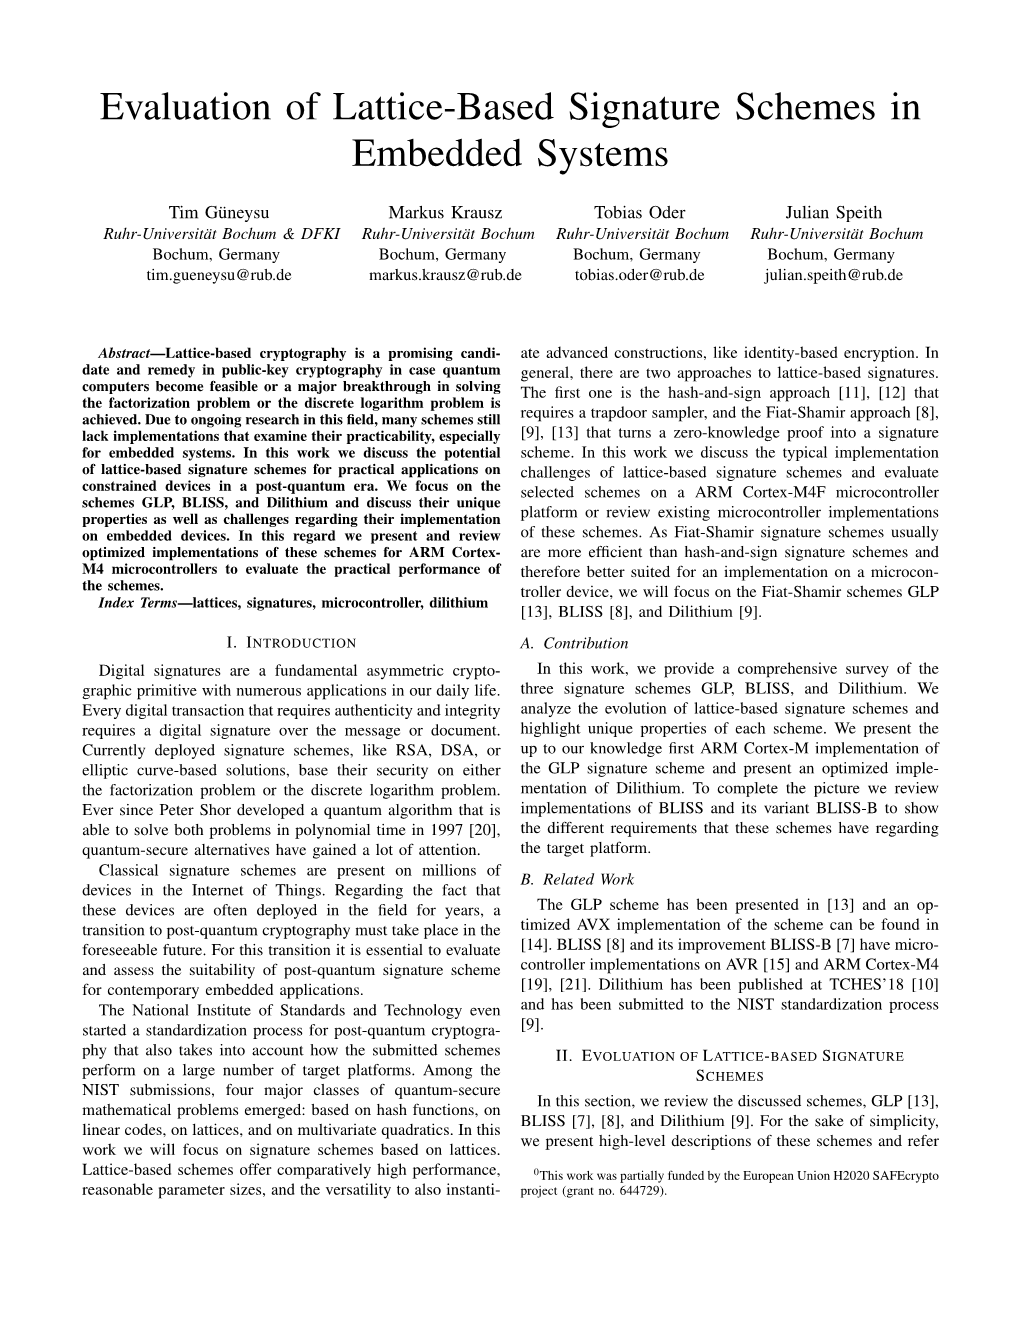 Evaluation of Lattice-Based Signature Schemes in Embedded Systems